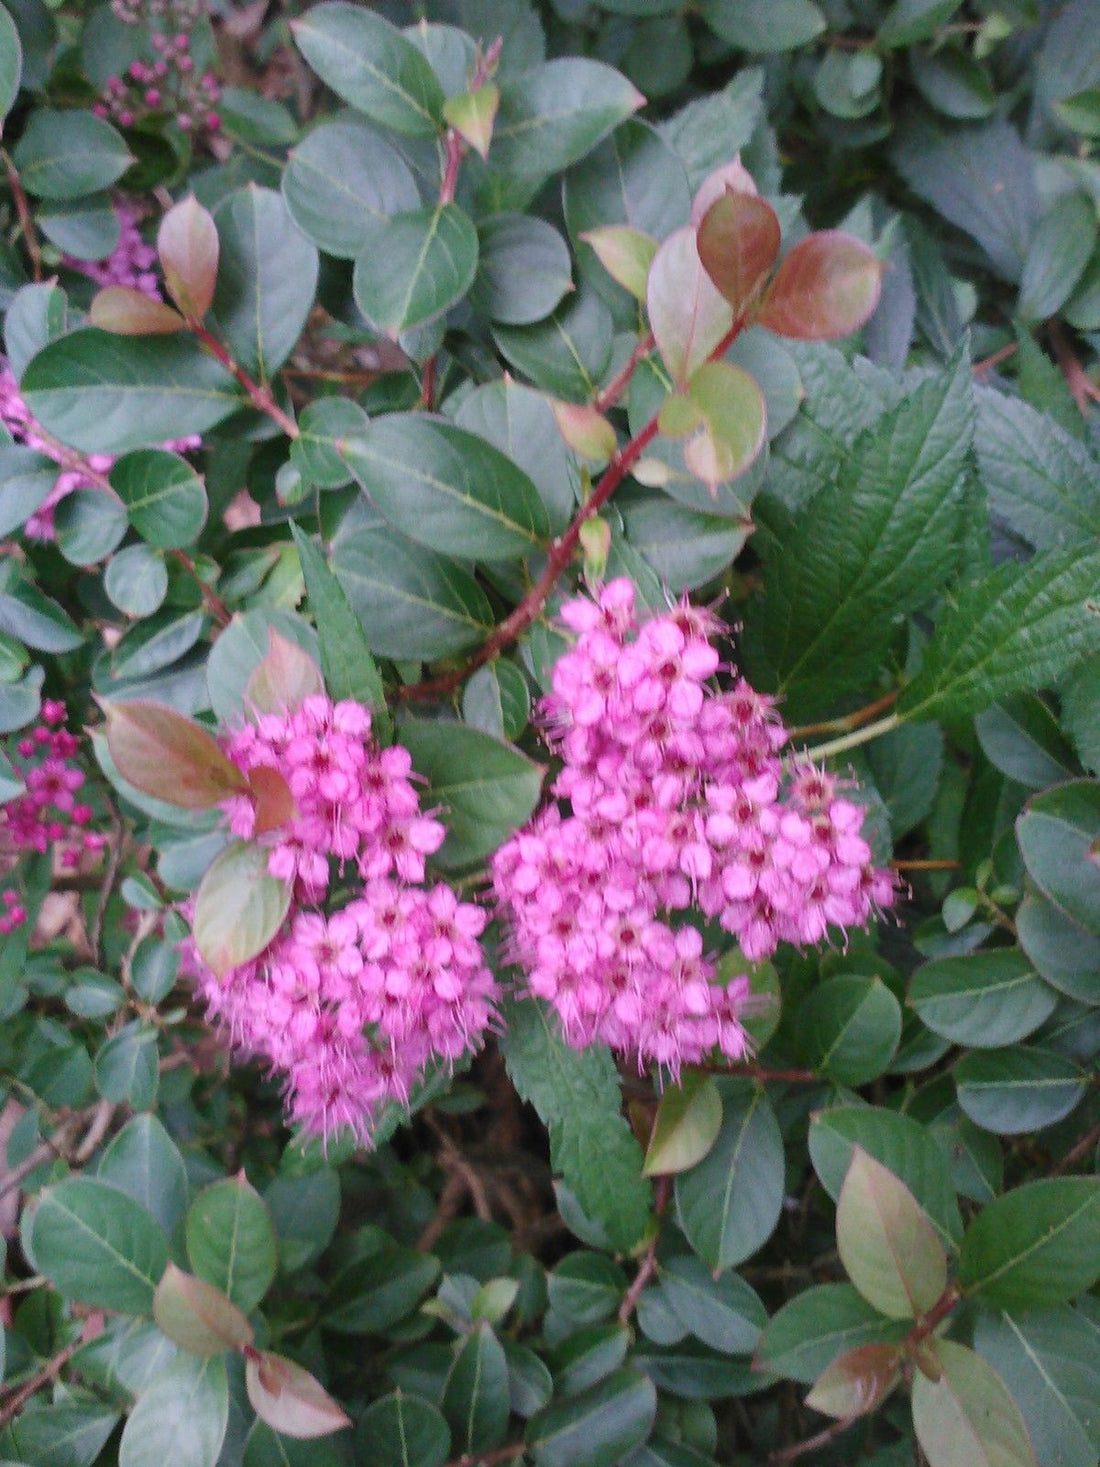 (1 Gallon) Neon Flash Spirea, Flashy Hot Pink Flowers Compact, Hardy Shrub, Adds Lot of Color